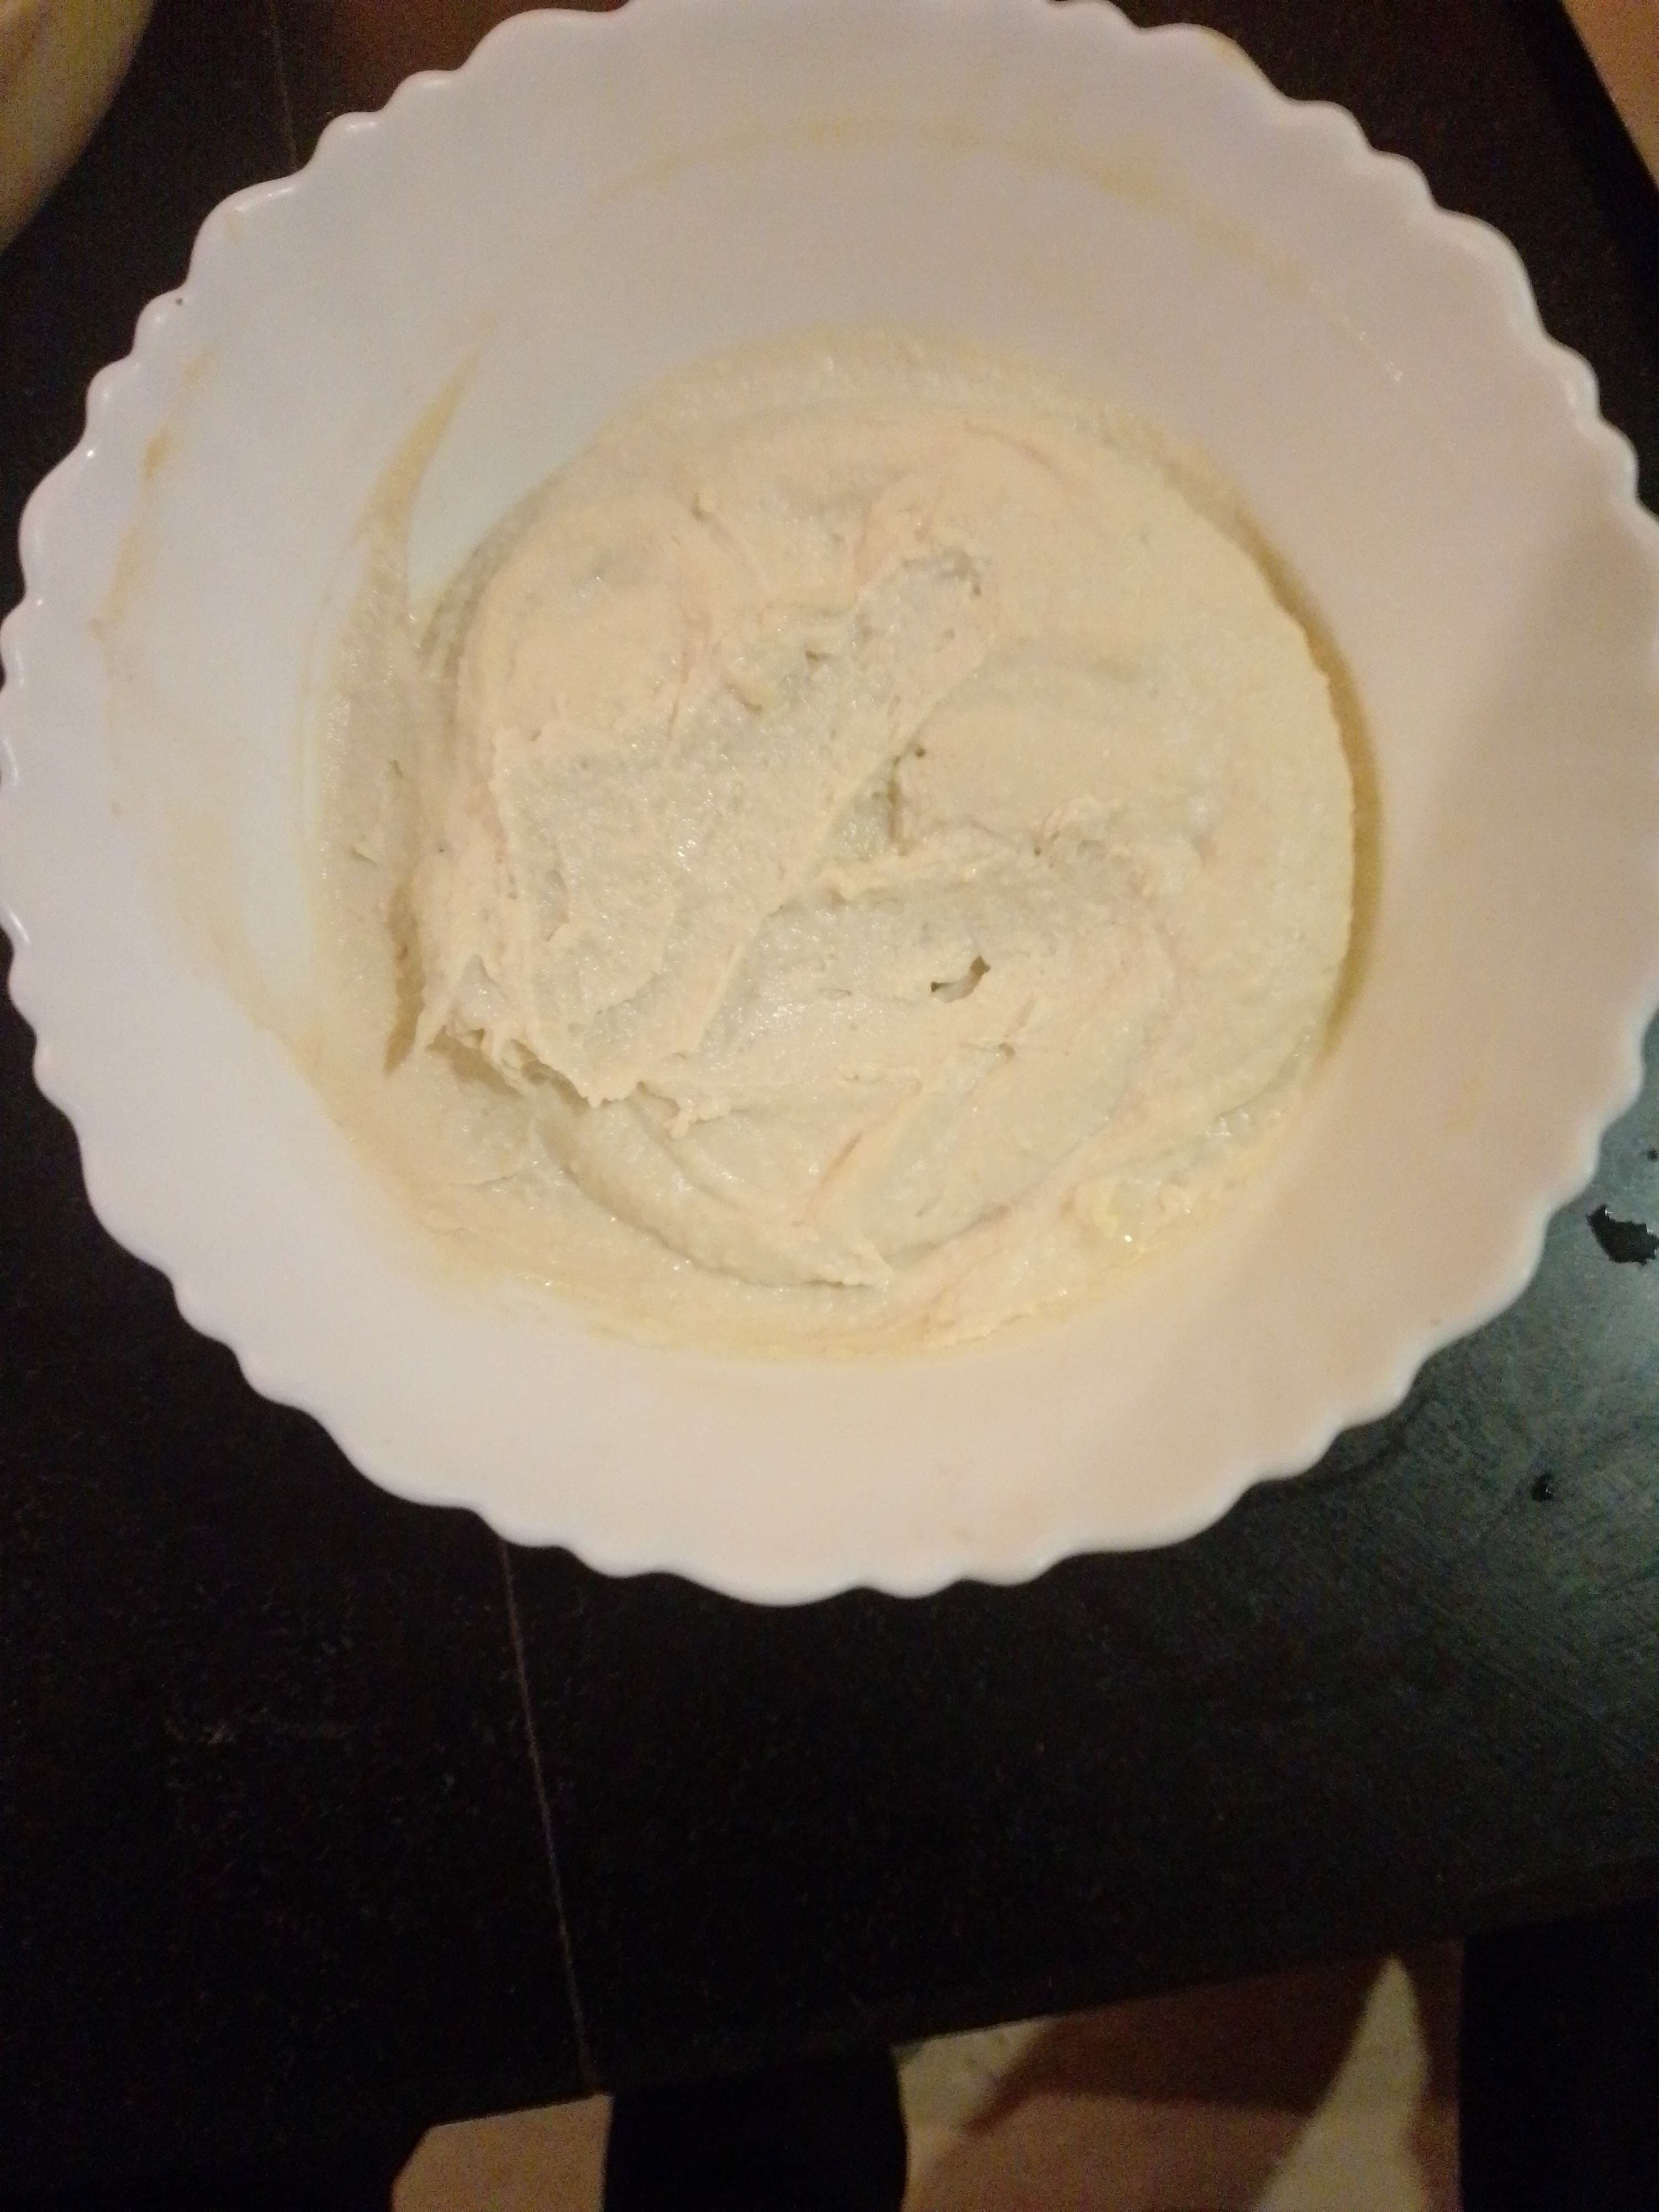 Delicious Hummus Dip prepared by COOX